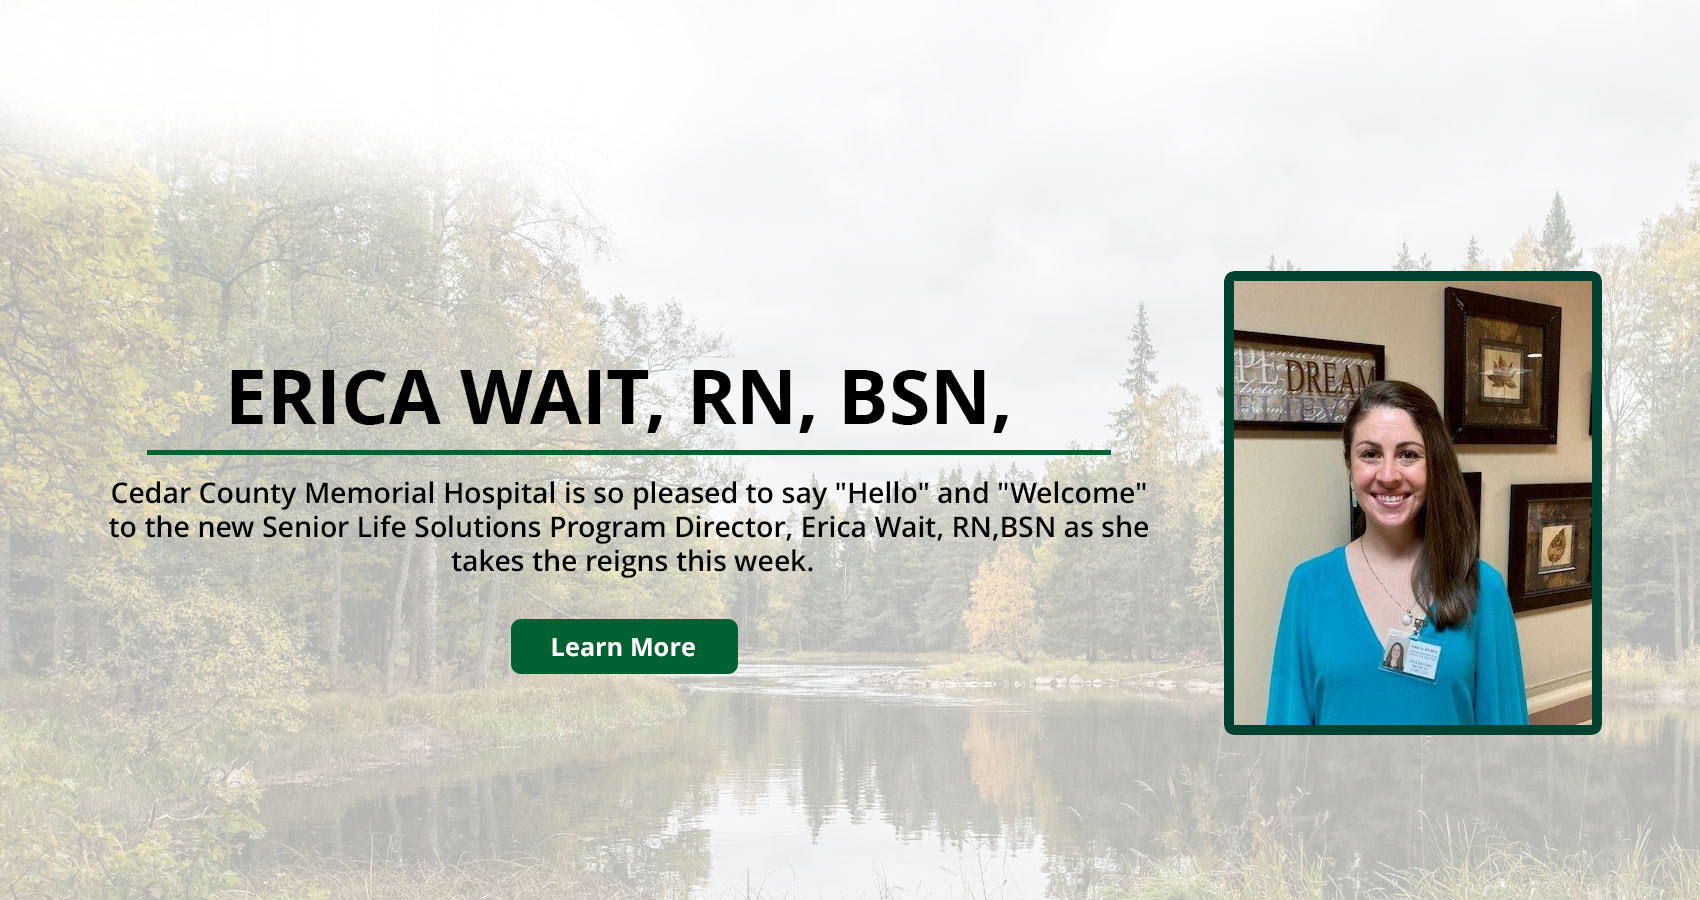 Banner picture of Erica Wait, smiling. There is a faded background of water surrounded by trees. Banner says:

WELCOME
ERICA WAIT, RN, BSN,

Cedar County Memorial Hospital is so pleased to say "Hello" and "Welcome" to the new Senior Life Solutions Program Director, Erica Wait, RN, BSN as she takes the reins this week.

(Learn More)